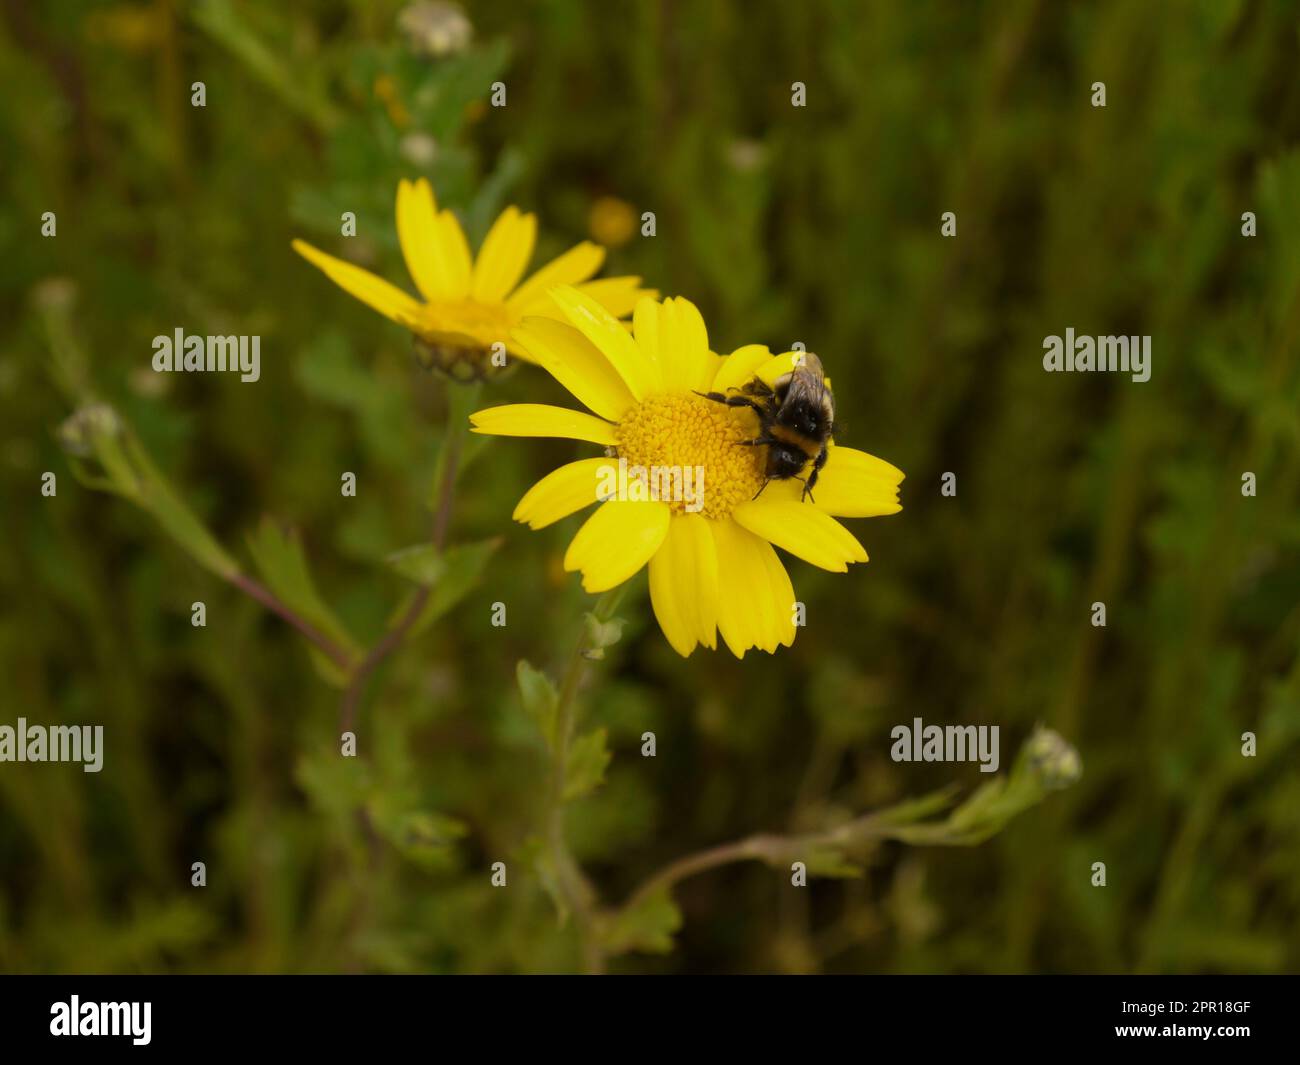 A bee gathers pollen from a corn marigold (Glebionis segetum) on the West Lawn at the Lost Gardens of Heligan - June 2019 Stock Photo